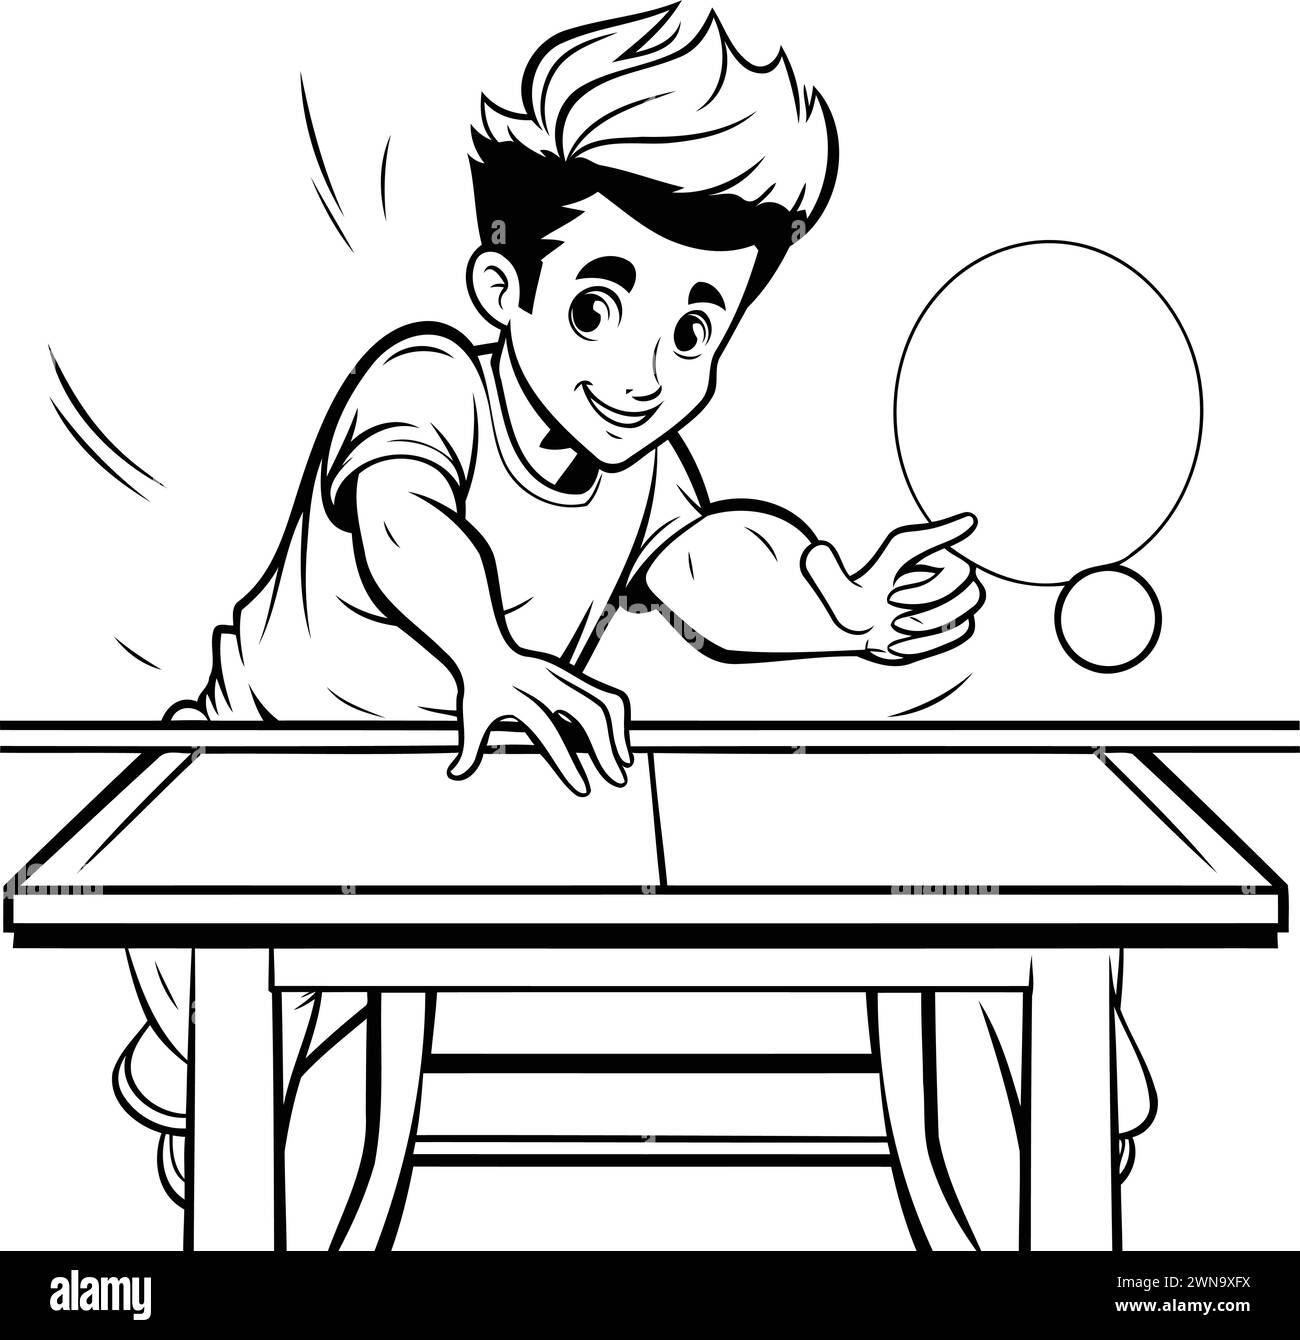 Boy playing table tennis. Black and white vector illustration for coloring book. Stock Vector